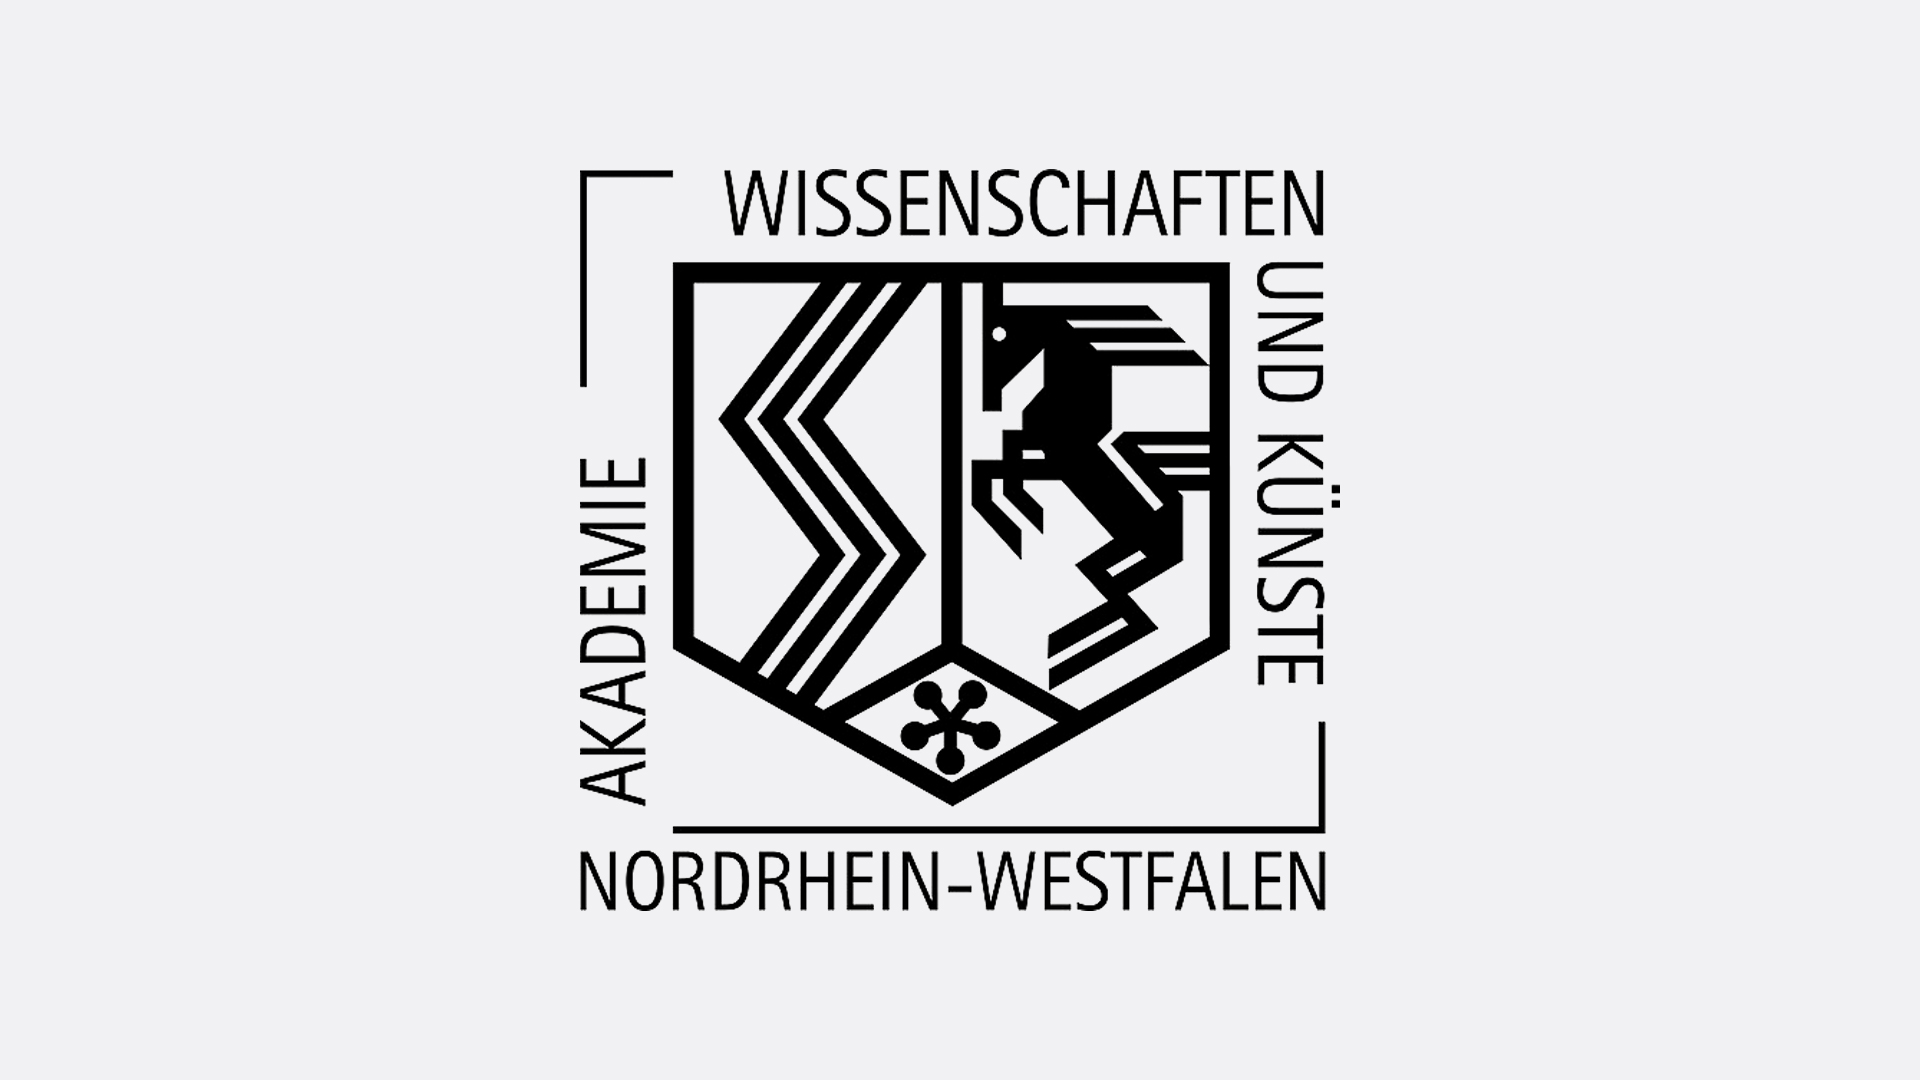 logo of the North Rhine-Westphalian Academy of Sciences, Humanities and the Arts